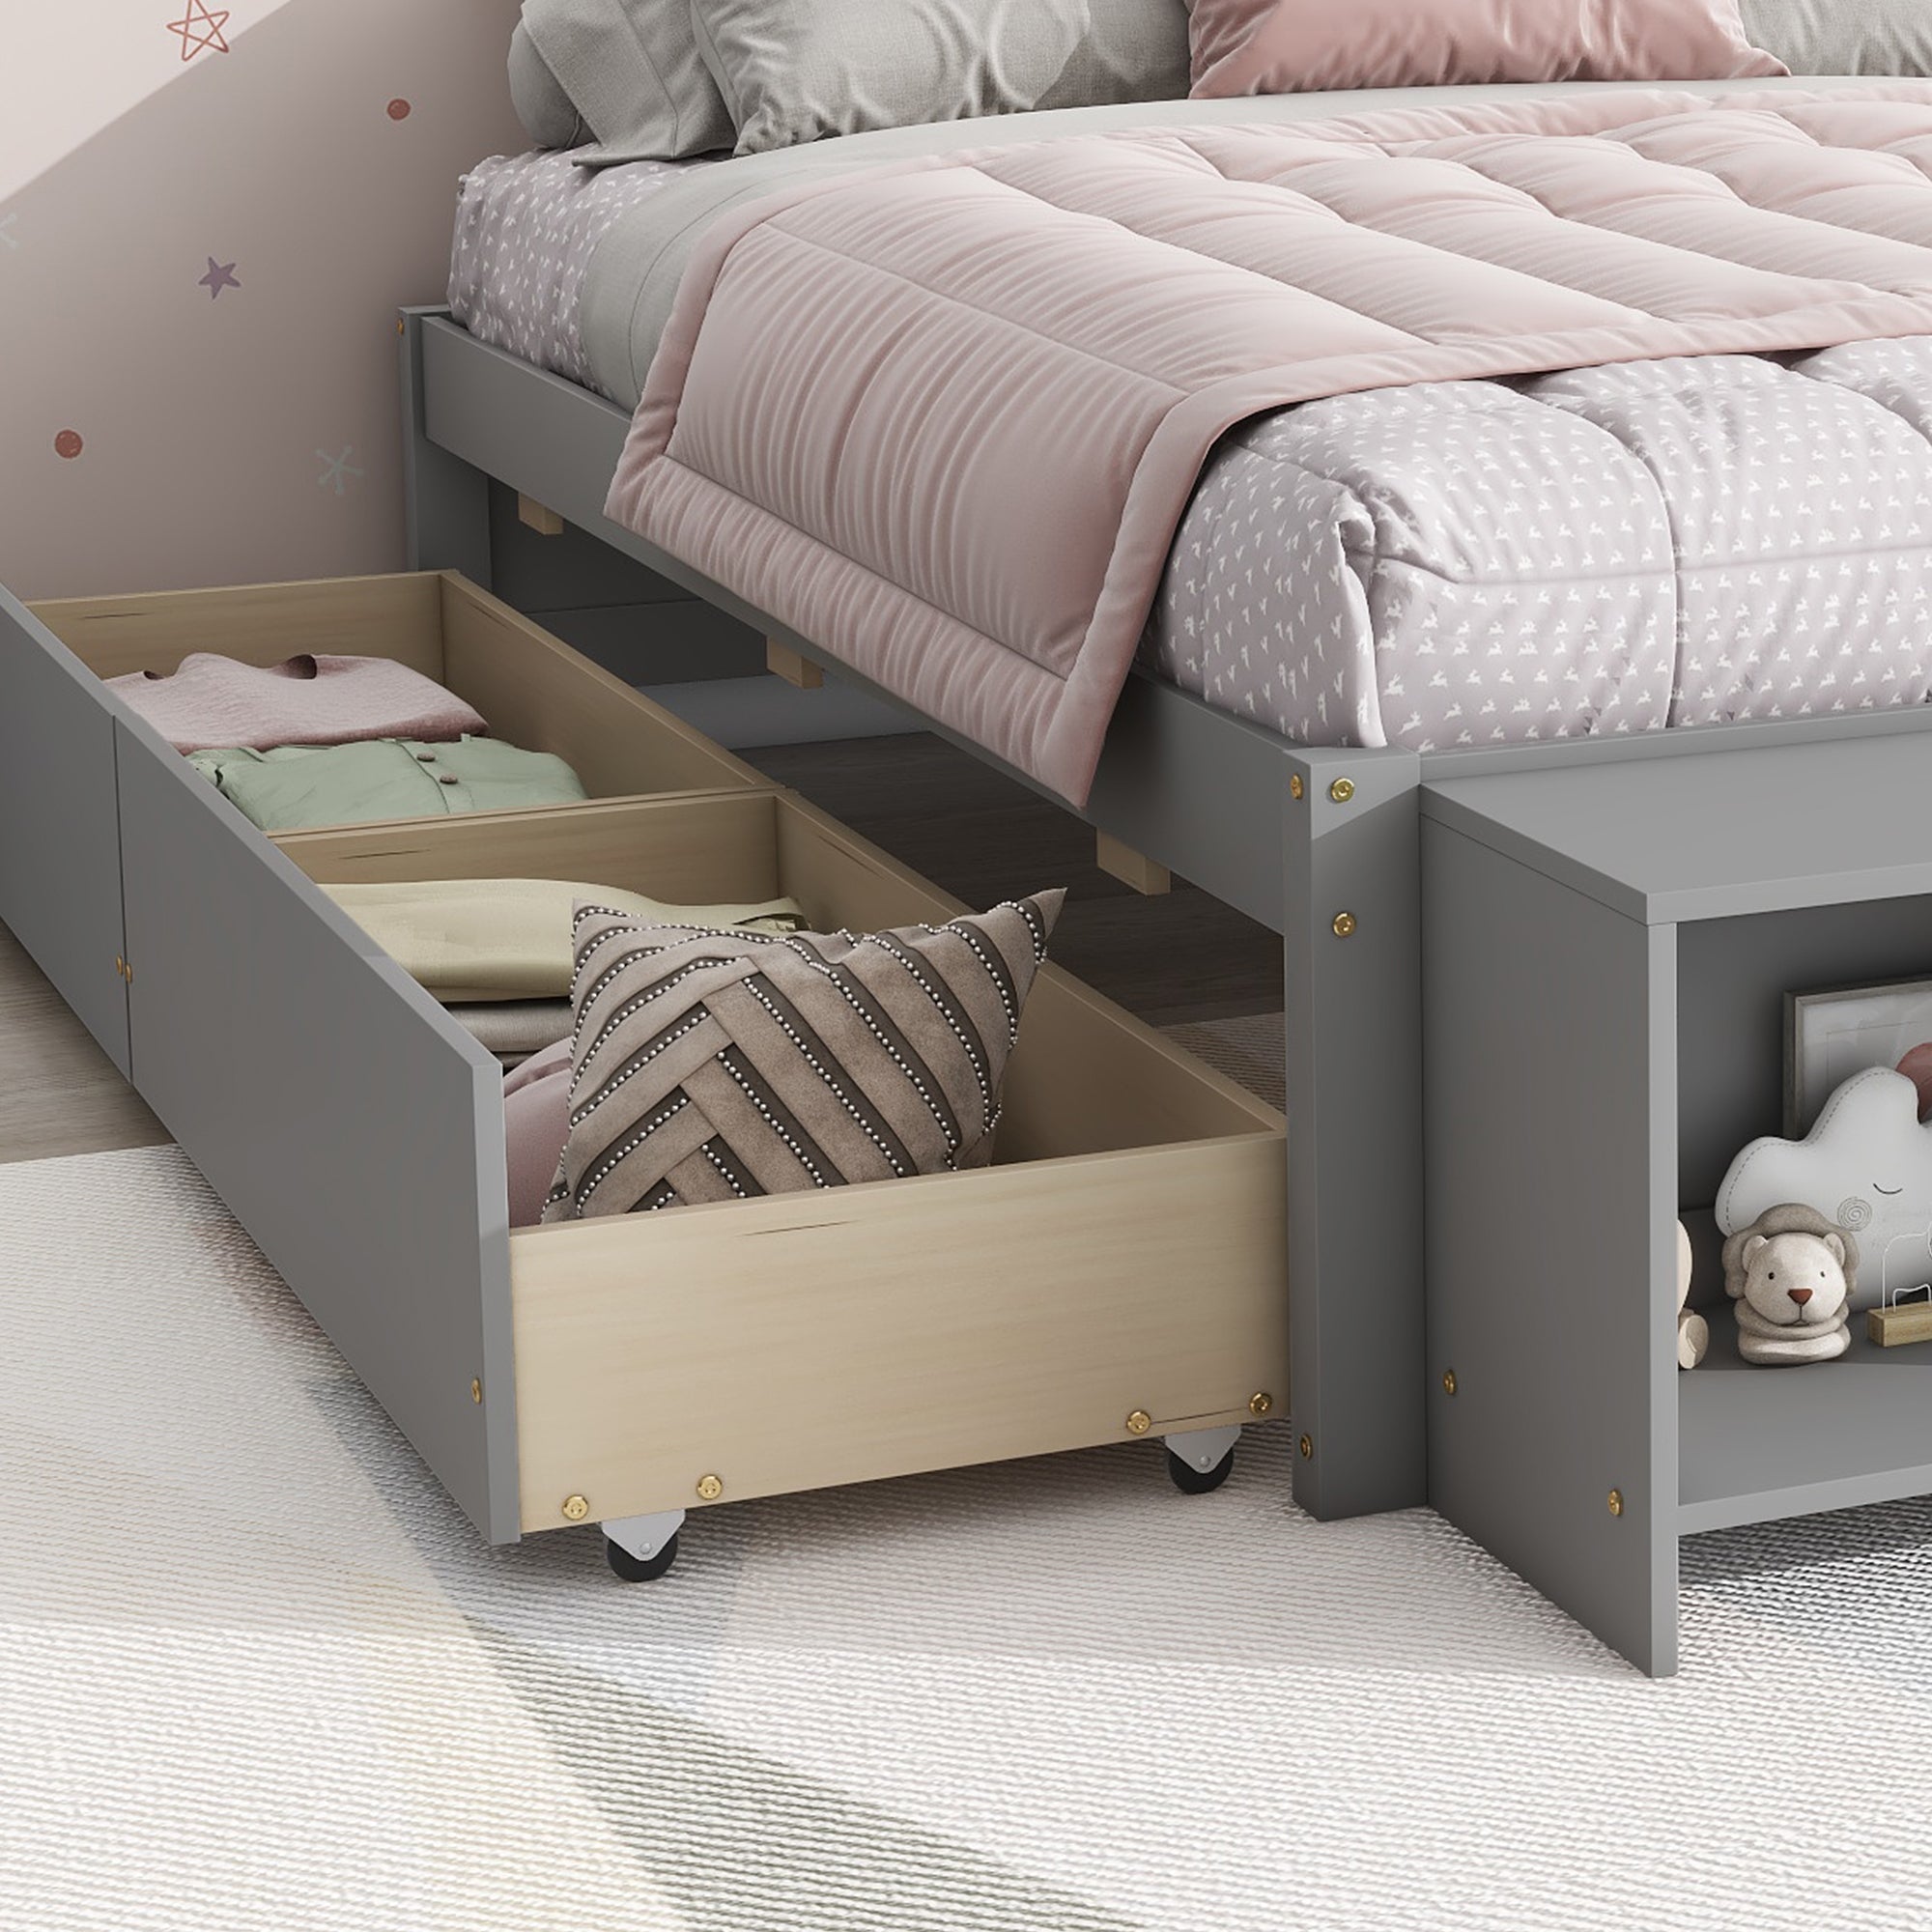 Full Size Bed with Storage Case, 2 Storage drawers full-grey-wood-bedroom-american design-pine-pine